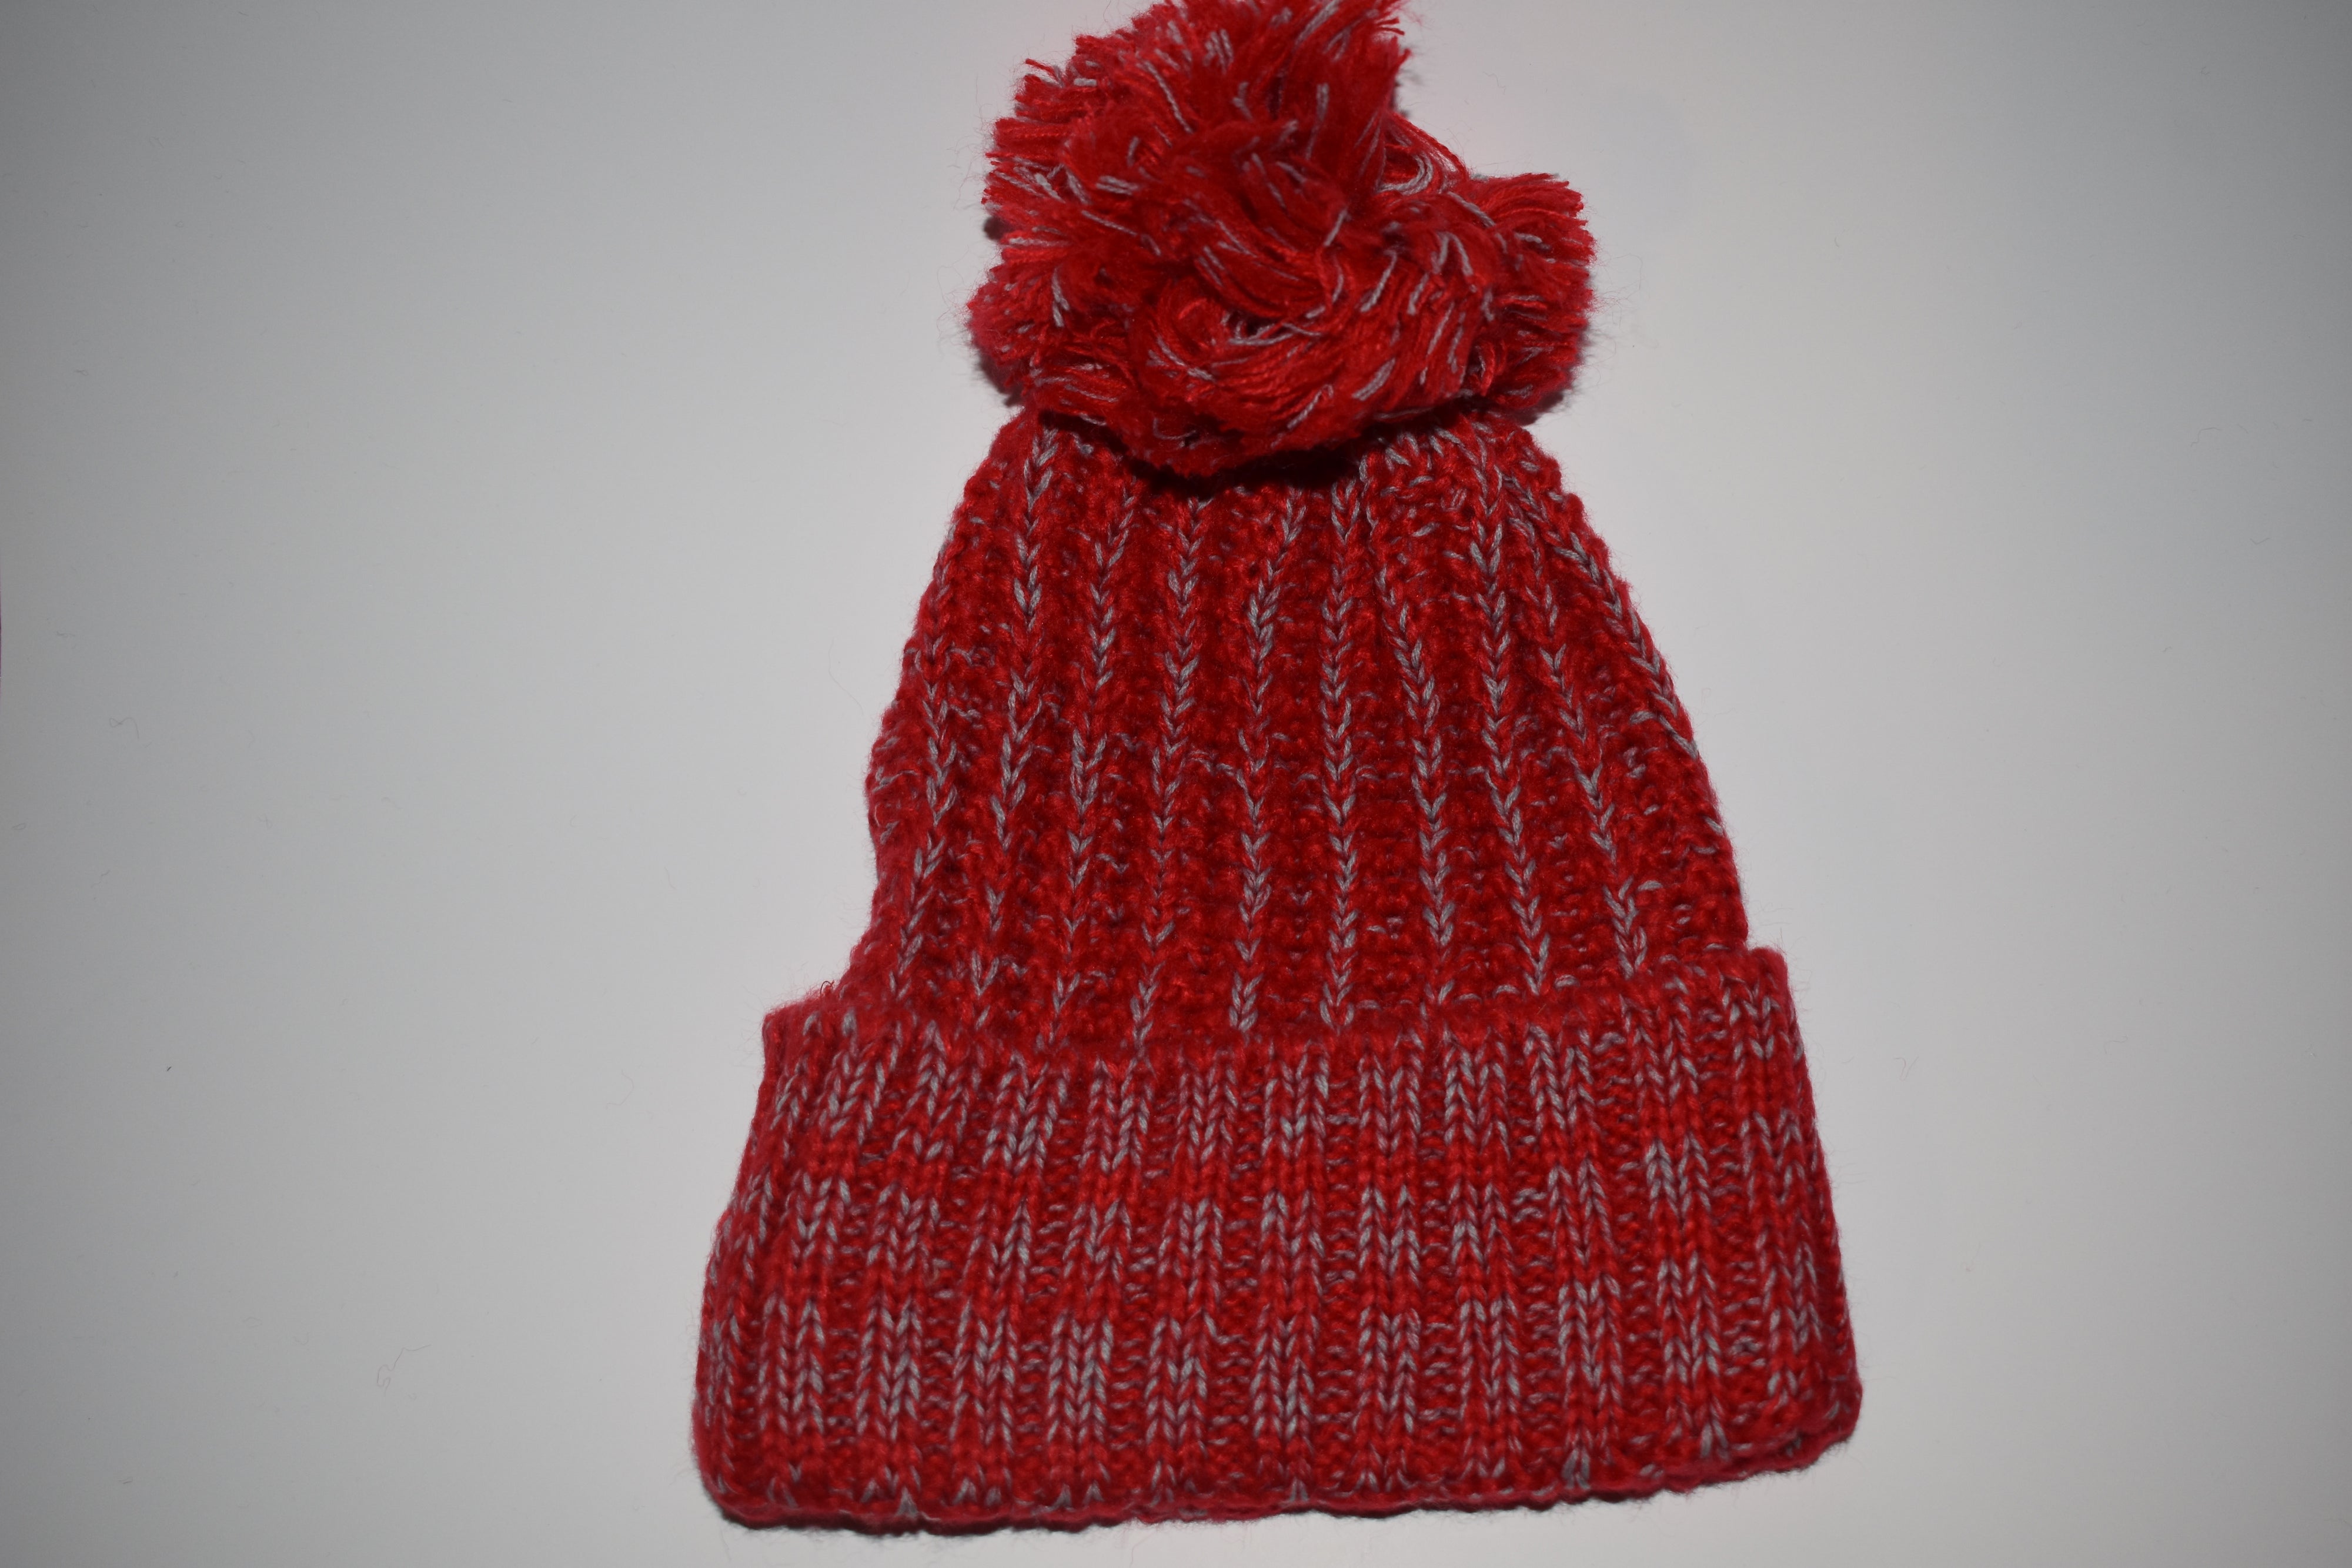 Guerrilla Speckled Red Beanie